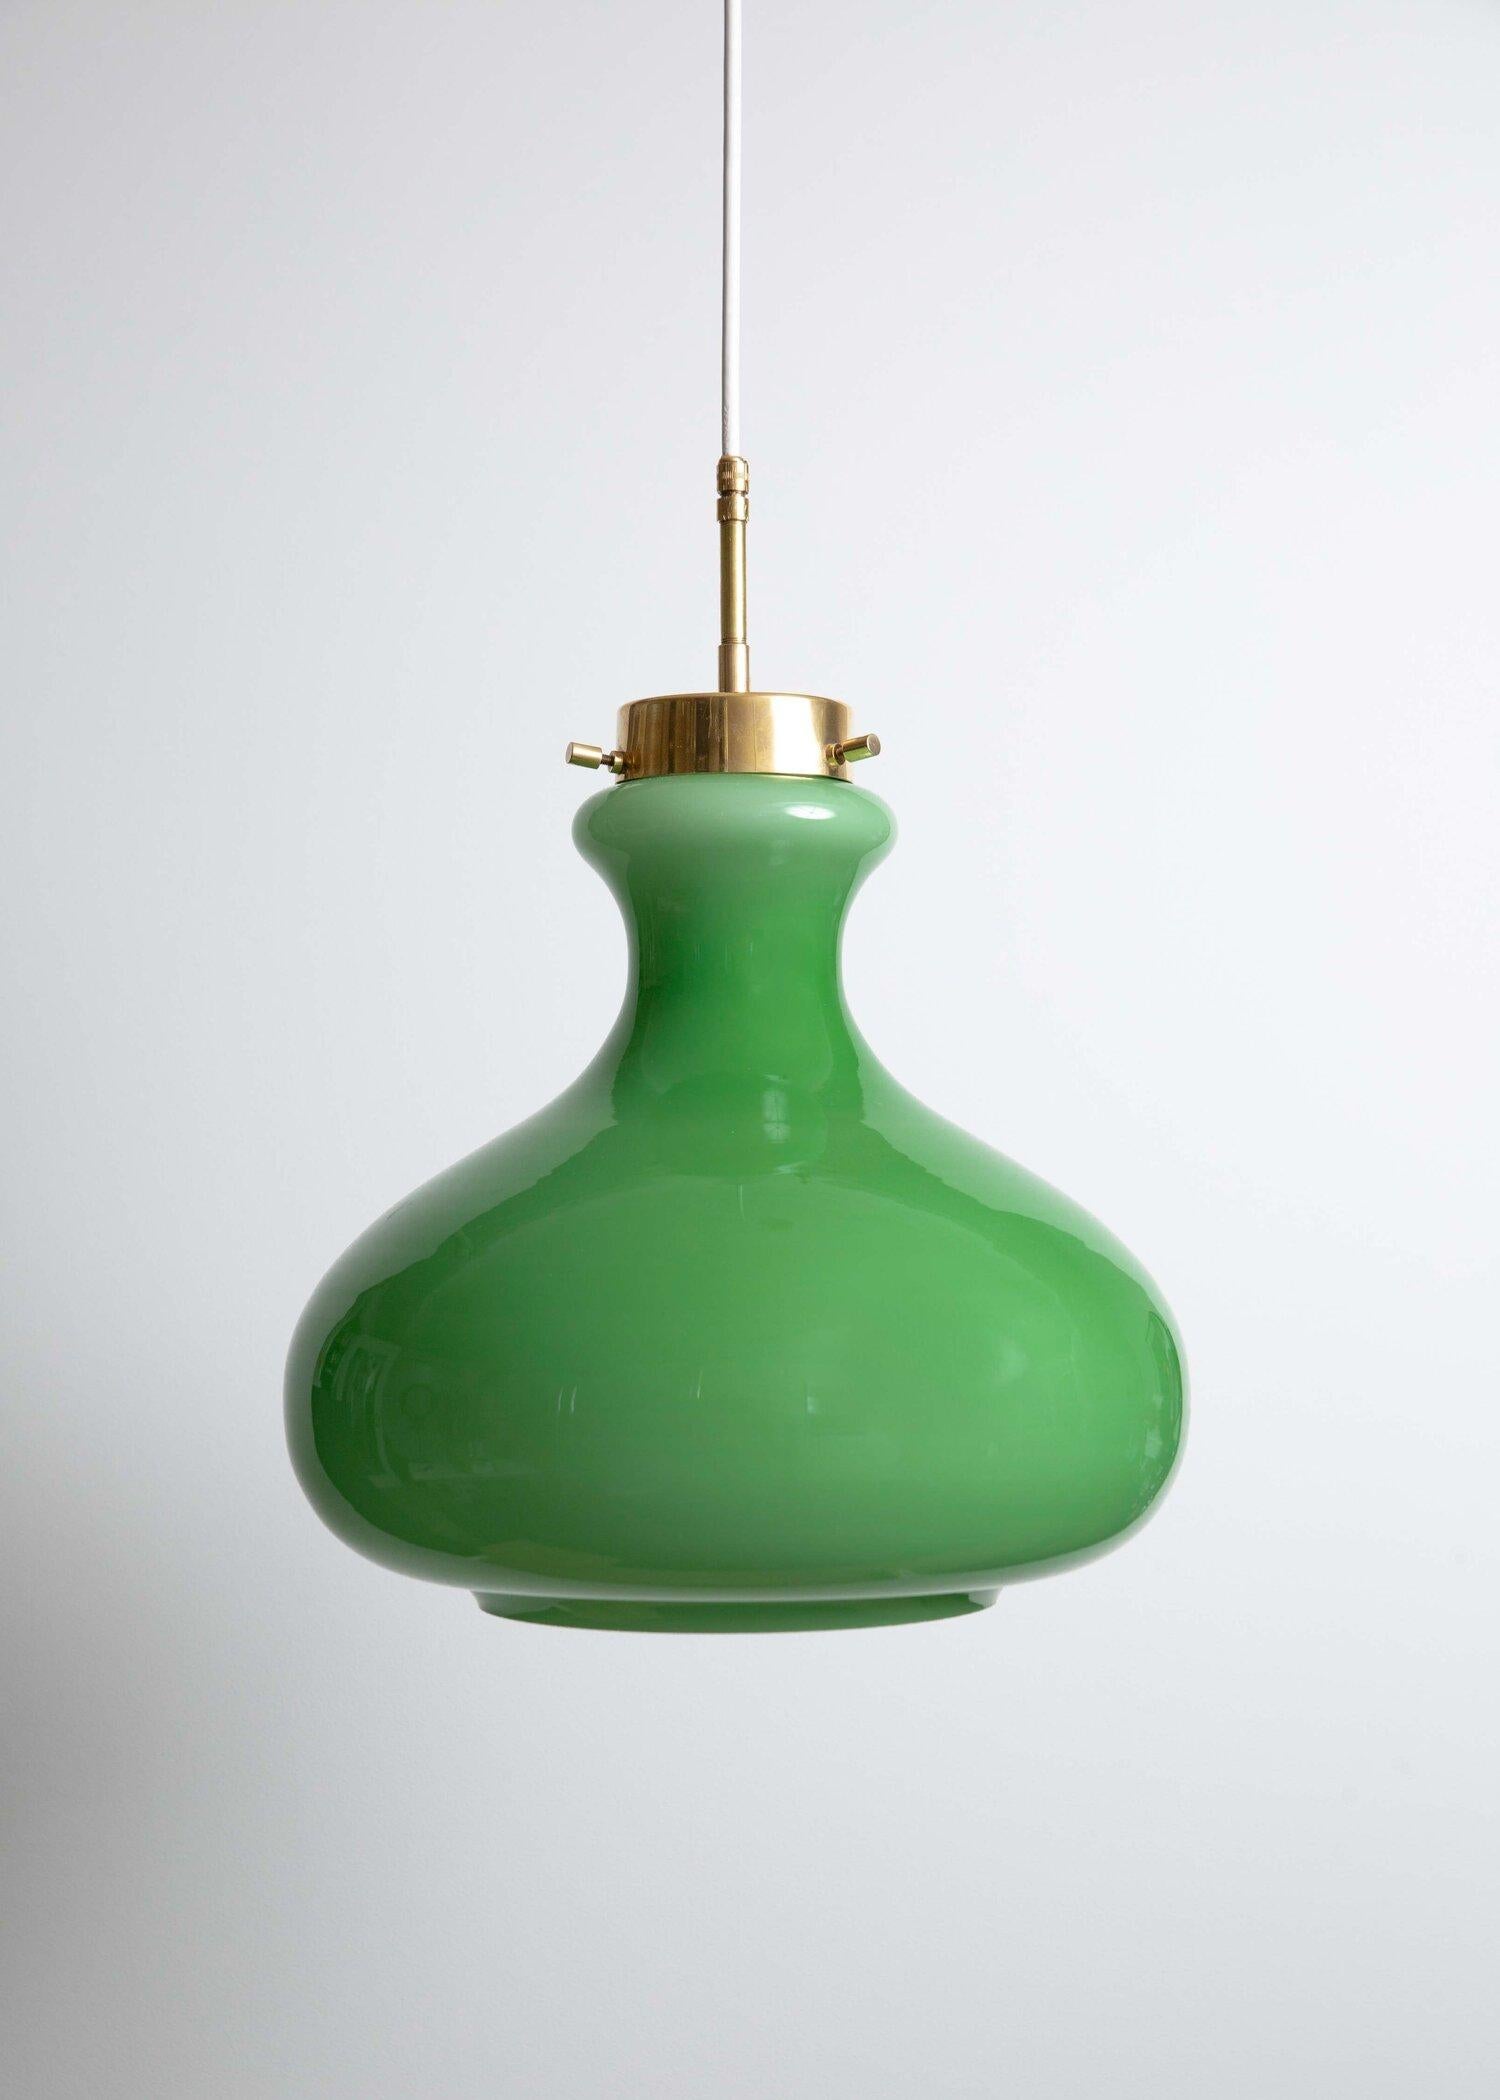 Exceptional large Murano glass pendant manufactured by Vistosi in the early 1960’s. Brass fittings compliment the clean lines. New brass canopy and 121 inches (307 cm) of round white cord included. Brass fittings compliment the clean lines.